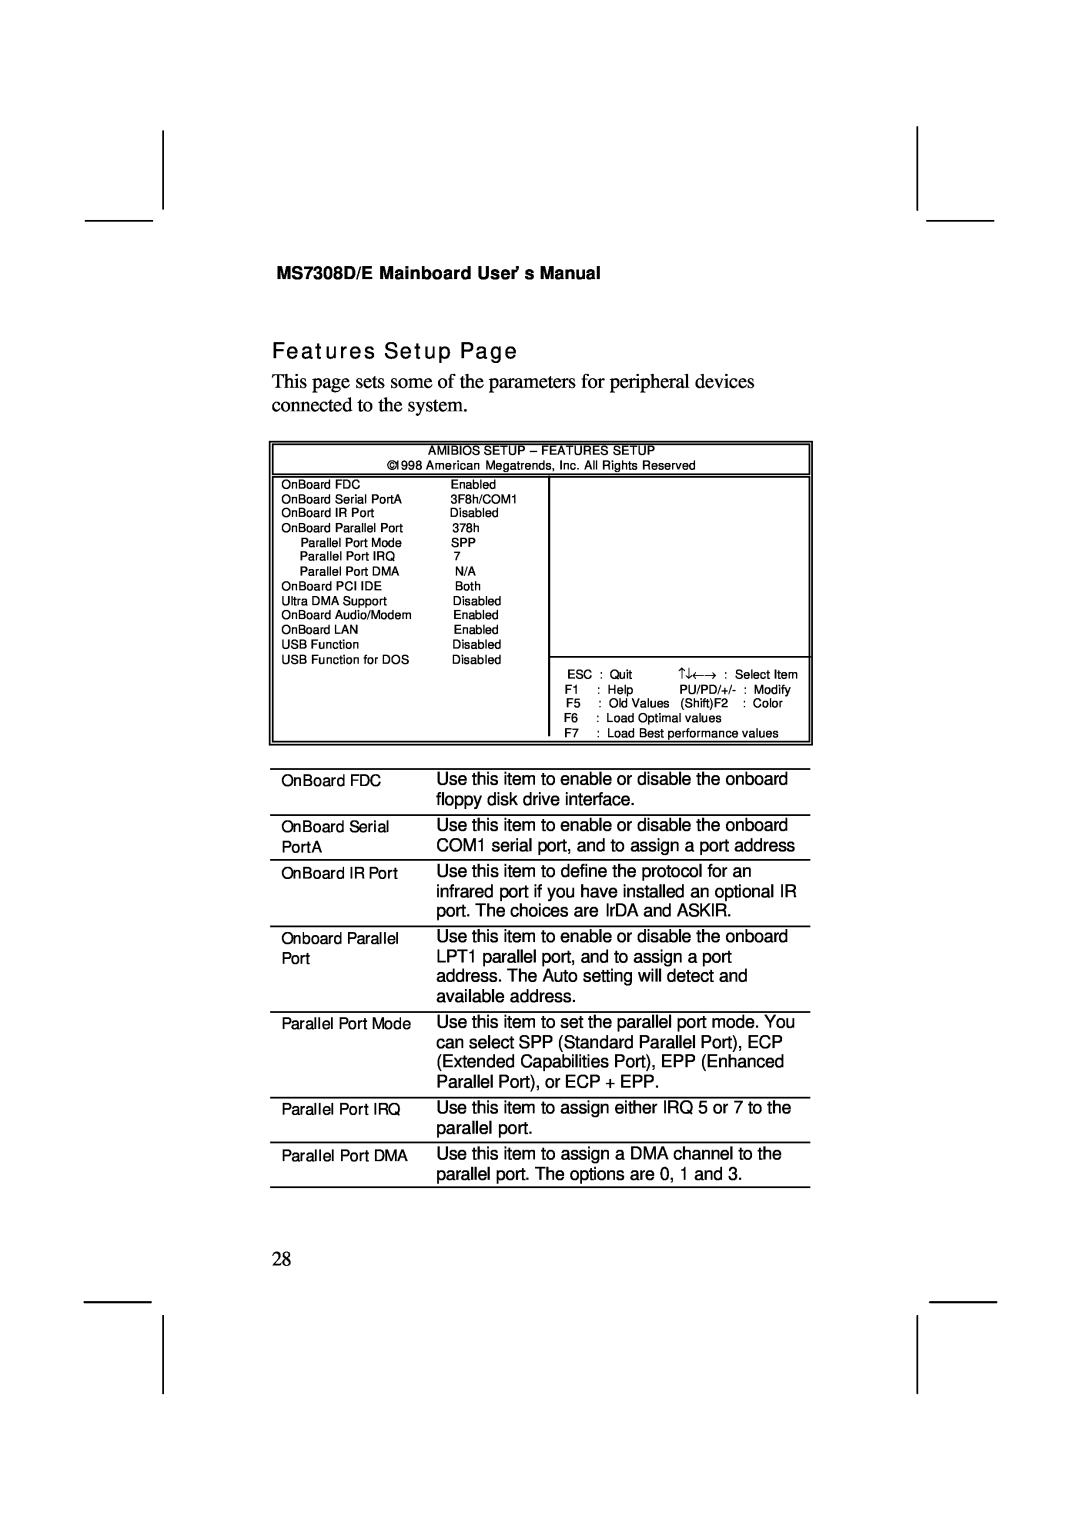 IBM V1.6 S63X/JUNE 2000, MS7308D/E user manual Features Setup Page 